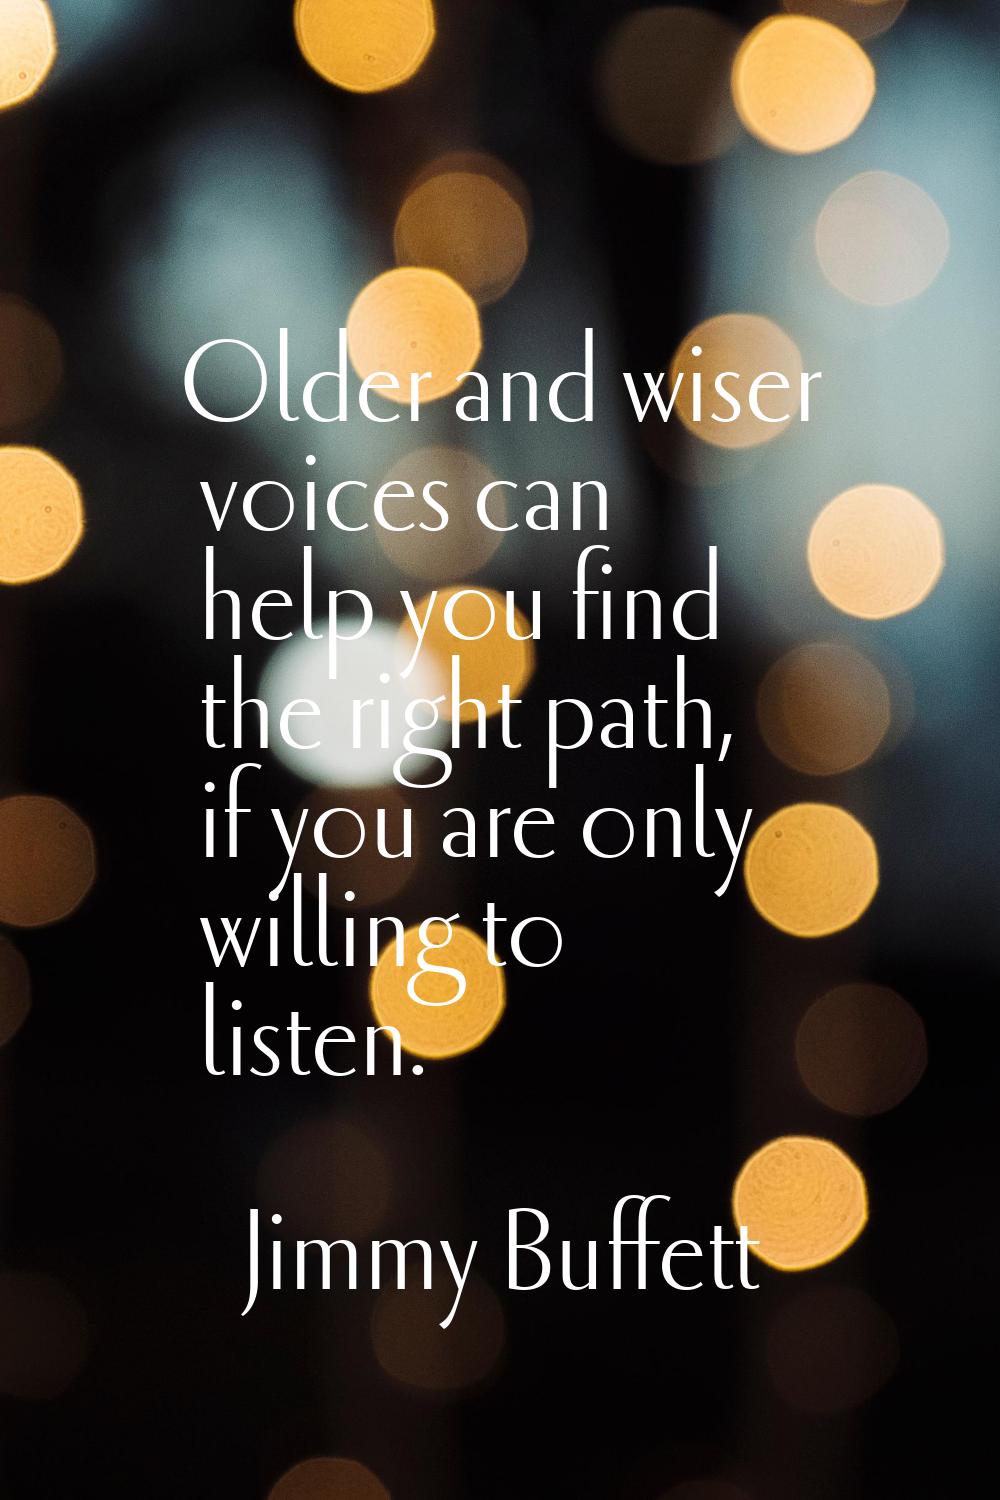 Older and wiser voices can help you find the right path, if you are only willing to listen.